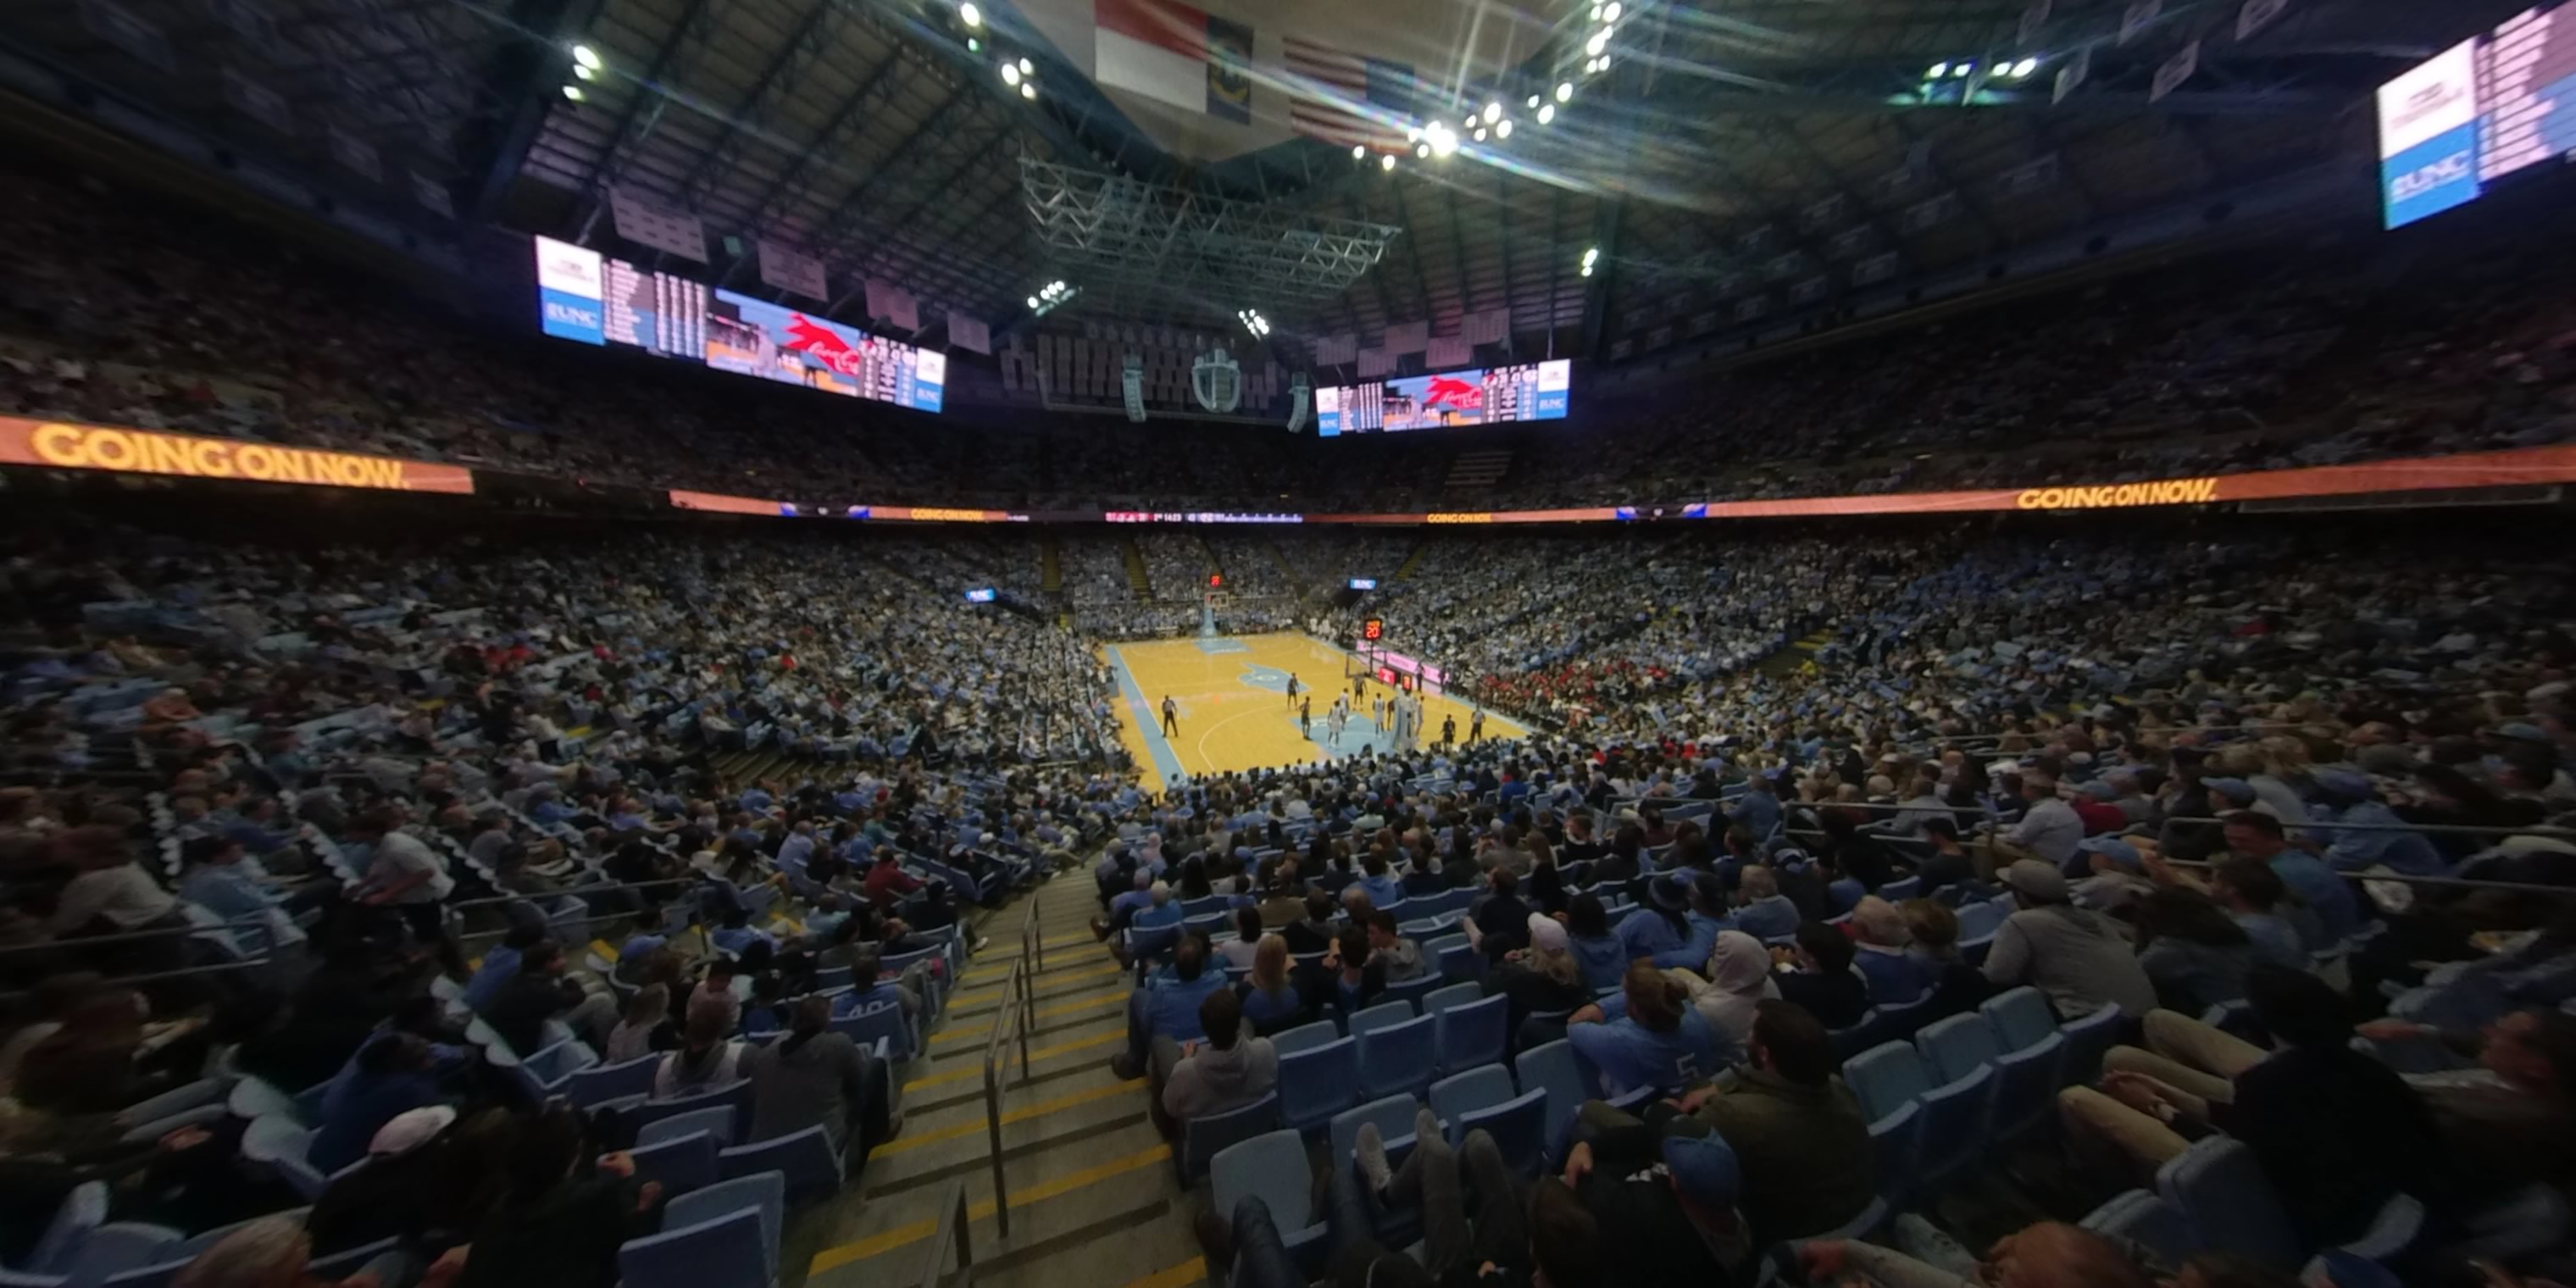 section 132 panoramic seat view  - dean smith center